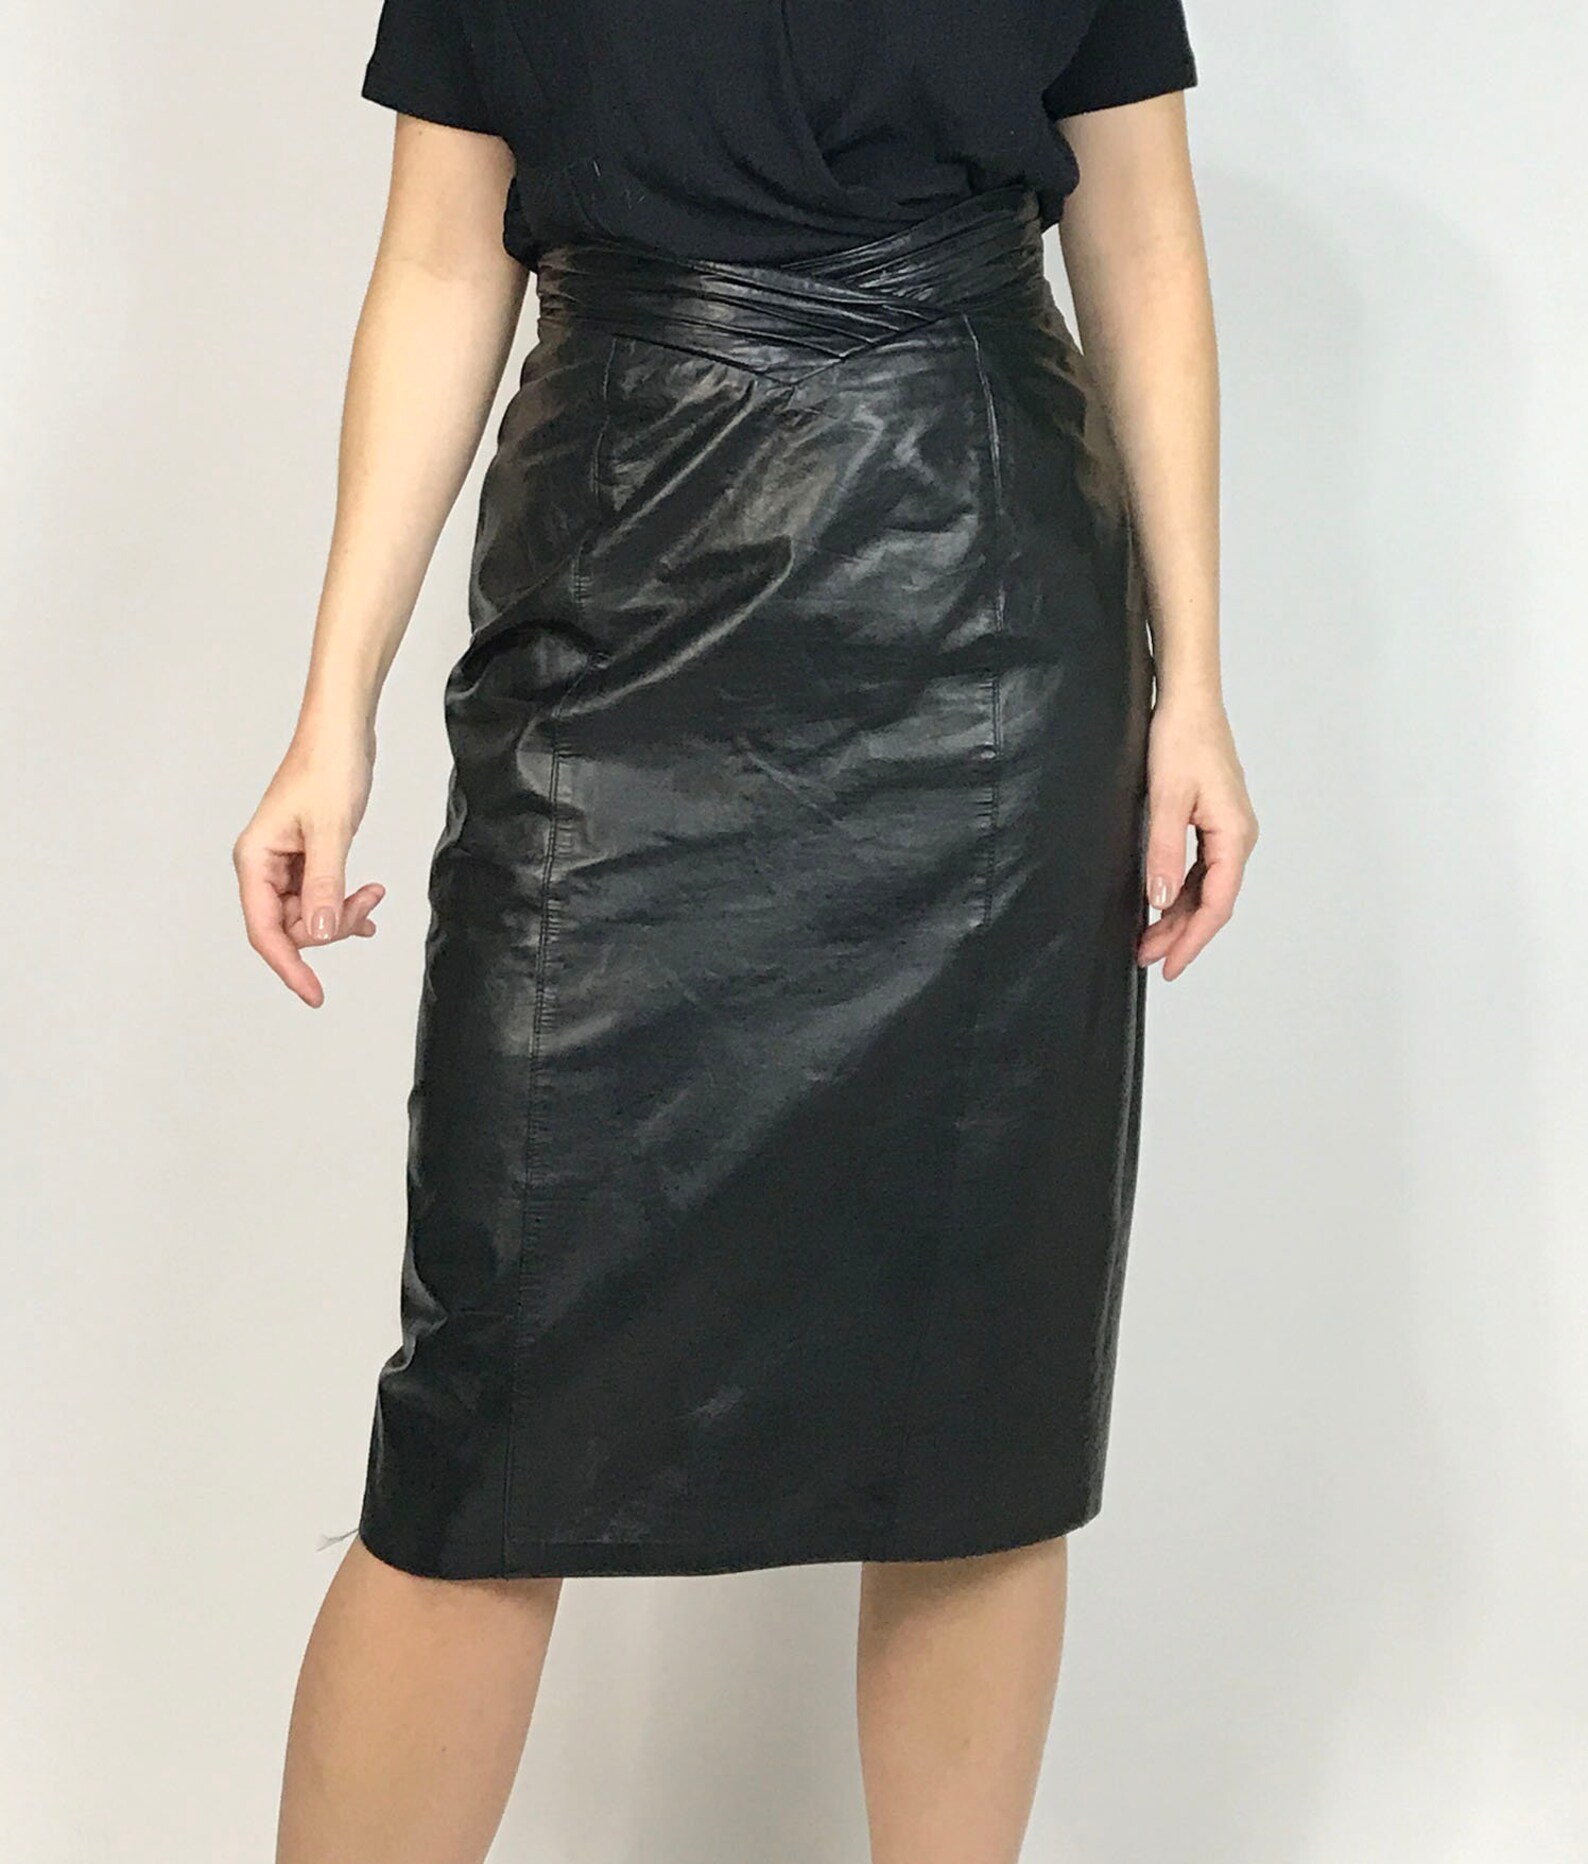 Vtg 80s LEATHER Pencil Skirt with V-PANEL Pleated High Waist | Etsy